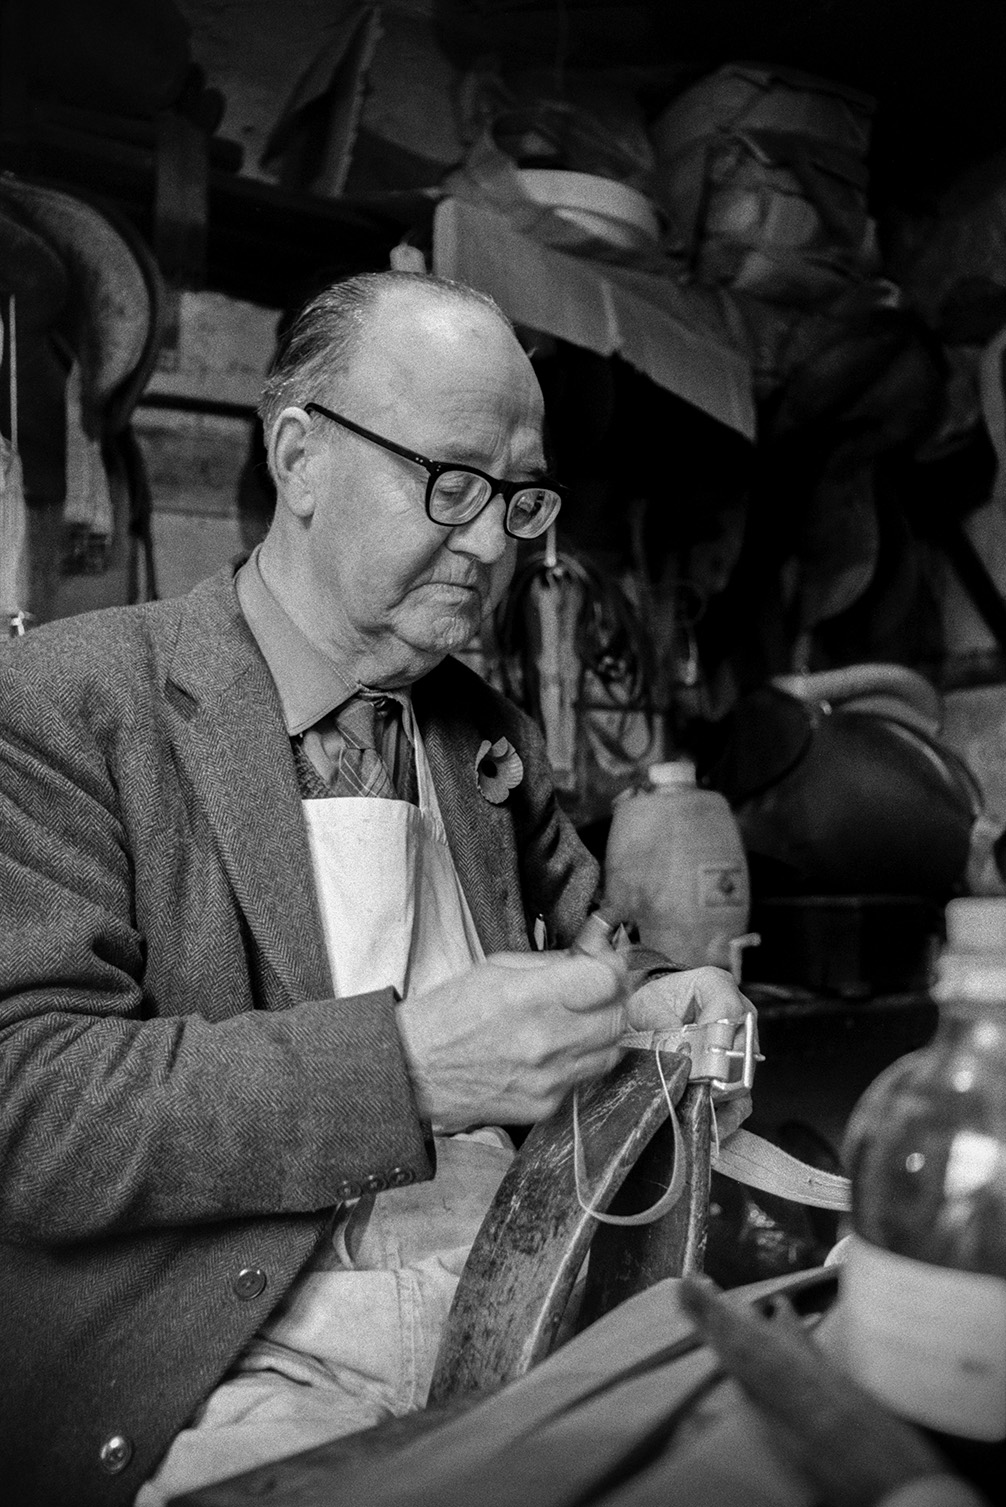 Walter Johns working on a leather belt or strap in his saddlery workshop at Bideford. He is sewing on the buckle. Various items can be seen in the workshop in the background.